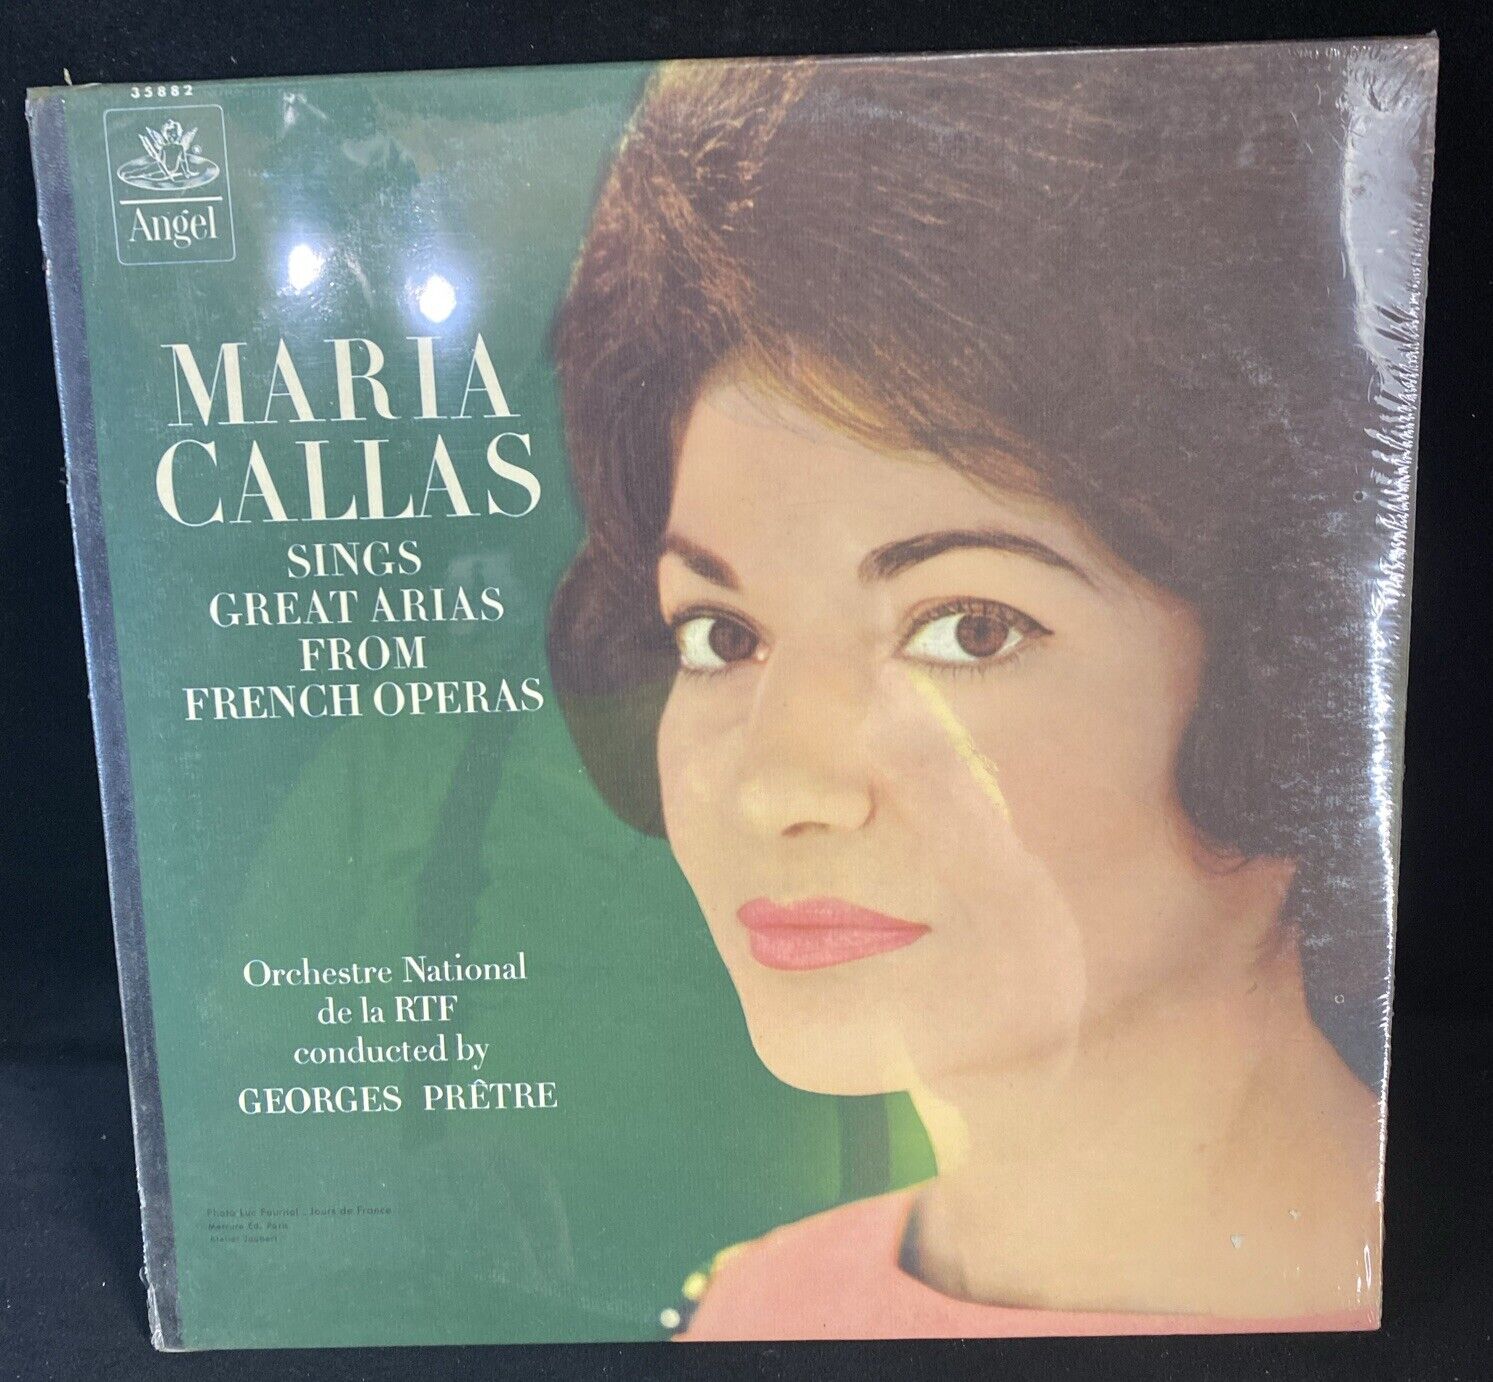 Maria Callas Sings Great Arias From French Operas Sealed New Angel Records 35882